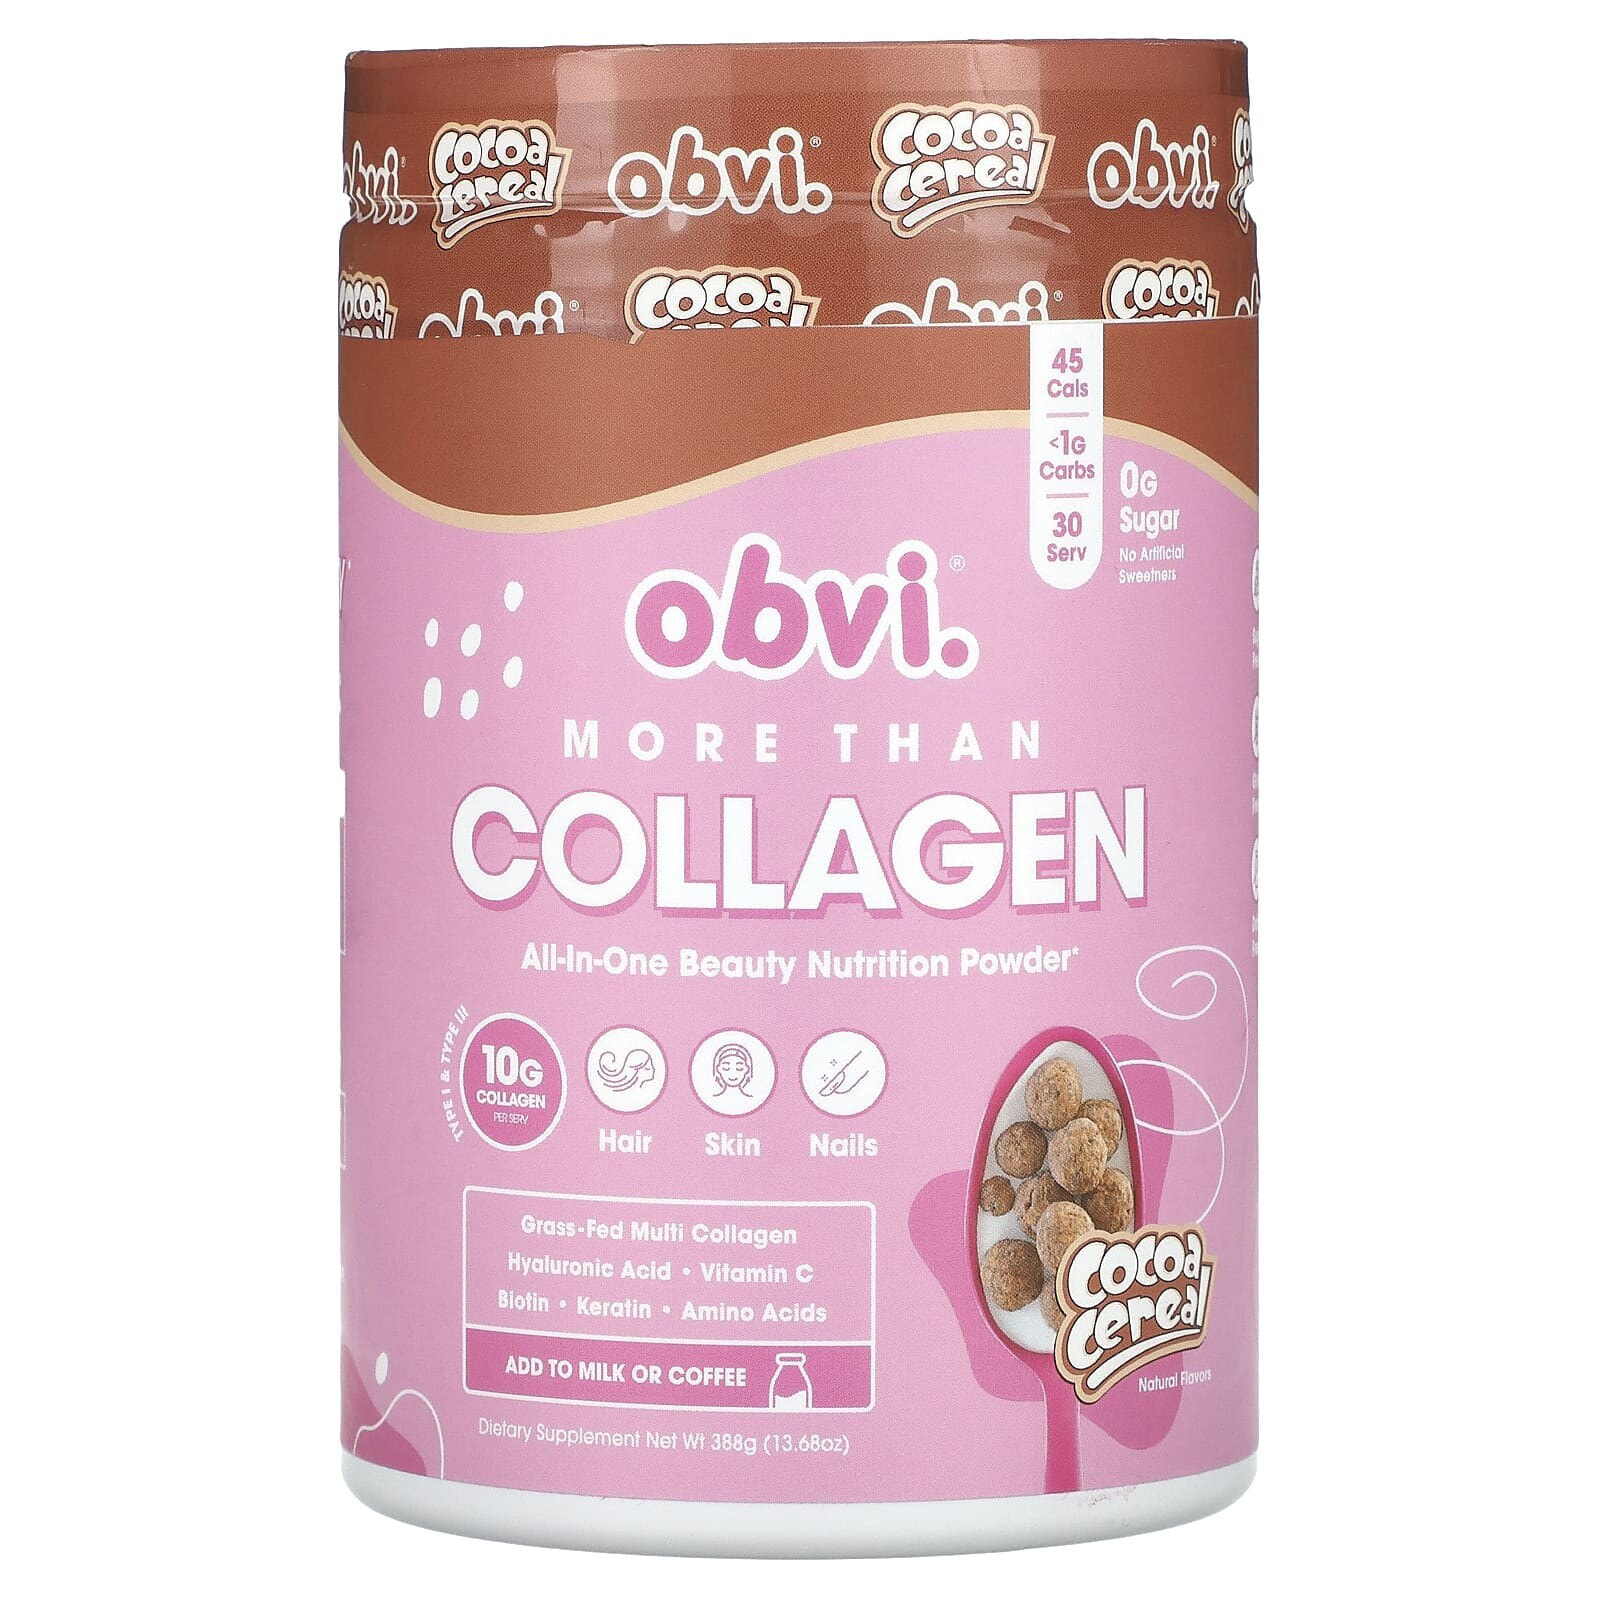 More Than Collagen, All-In-One Beauty Nutrition Powder, Cocoa Cereal, 13.68 oz (388 g)